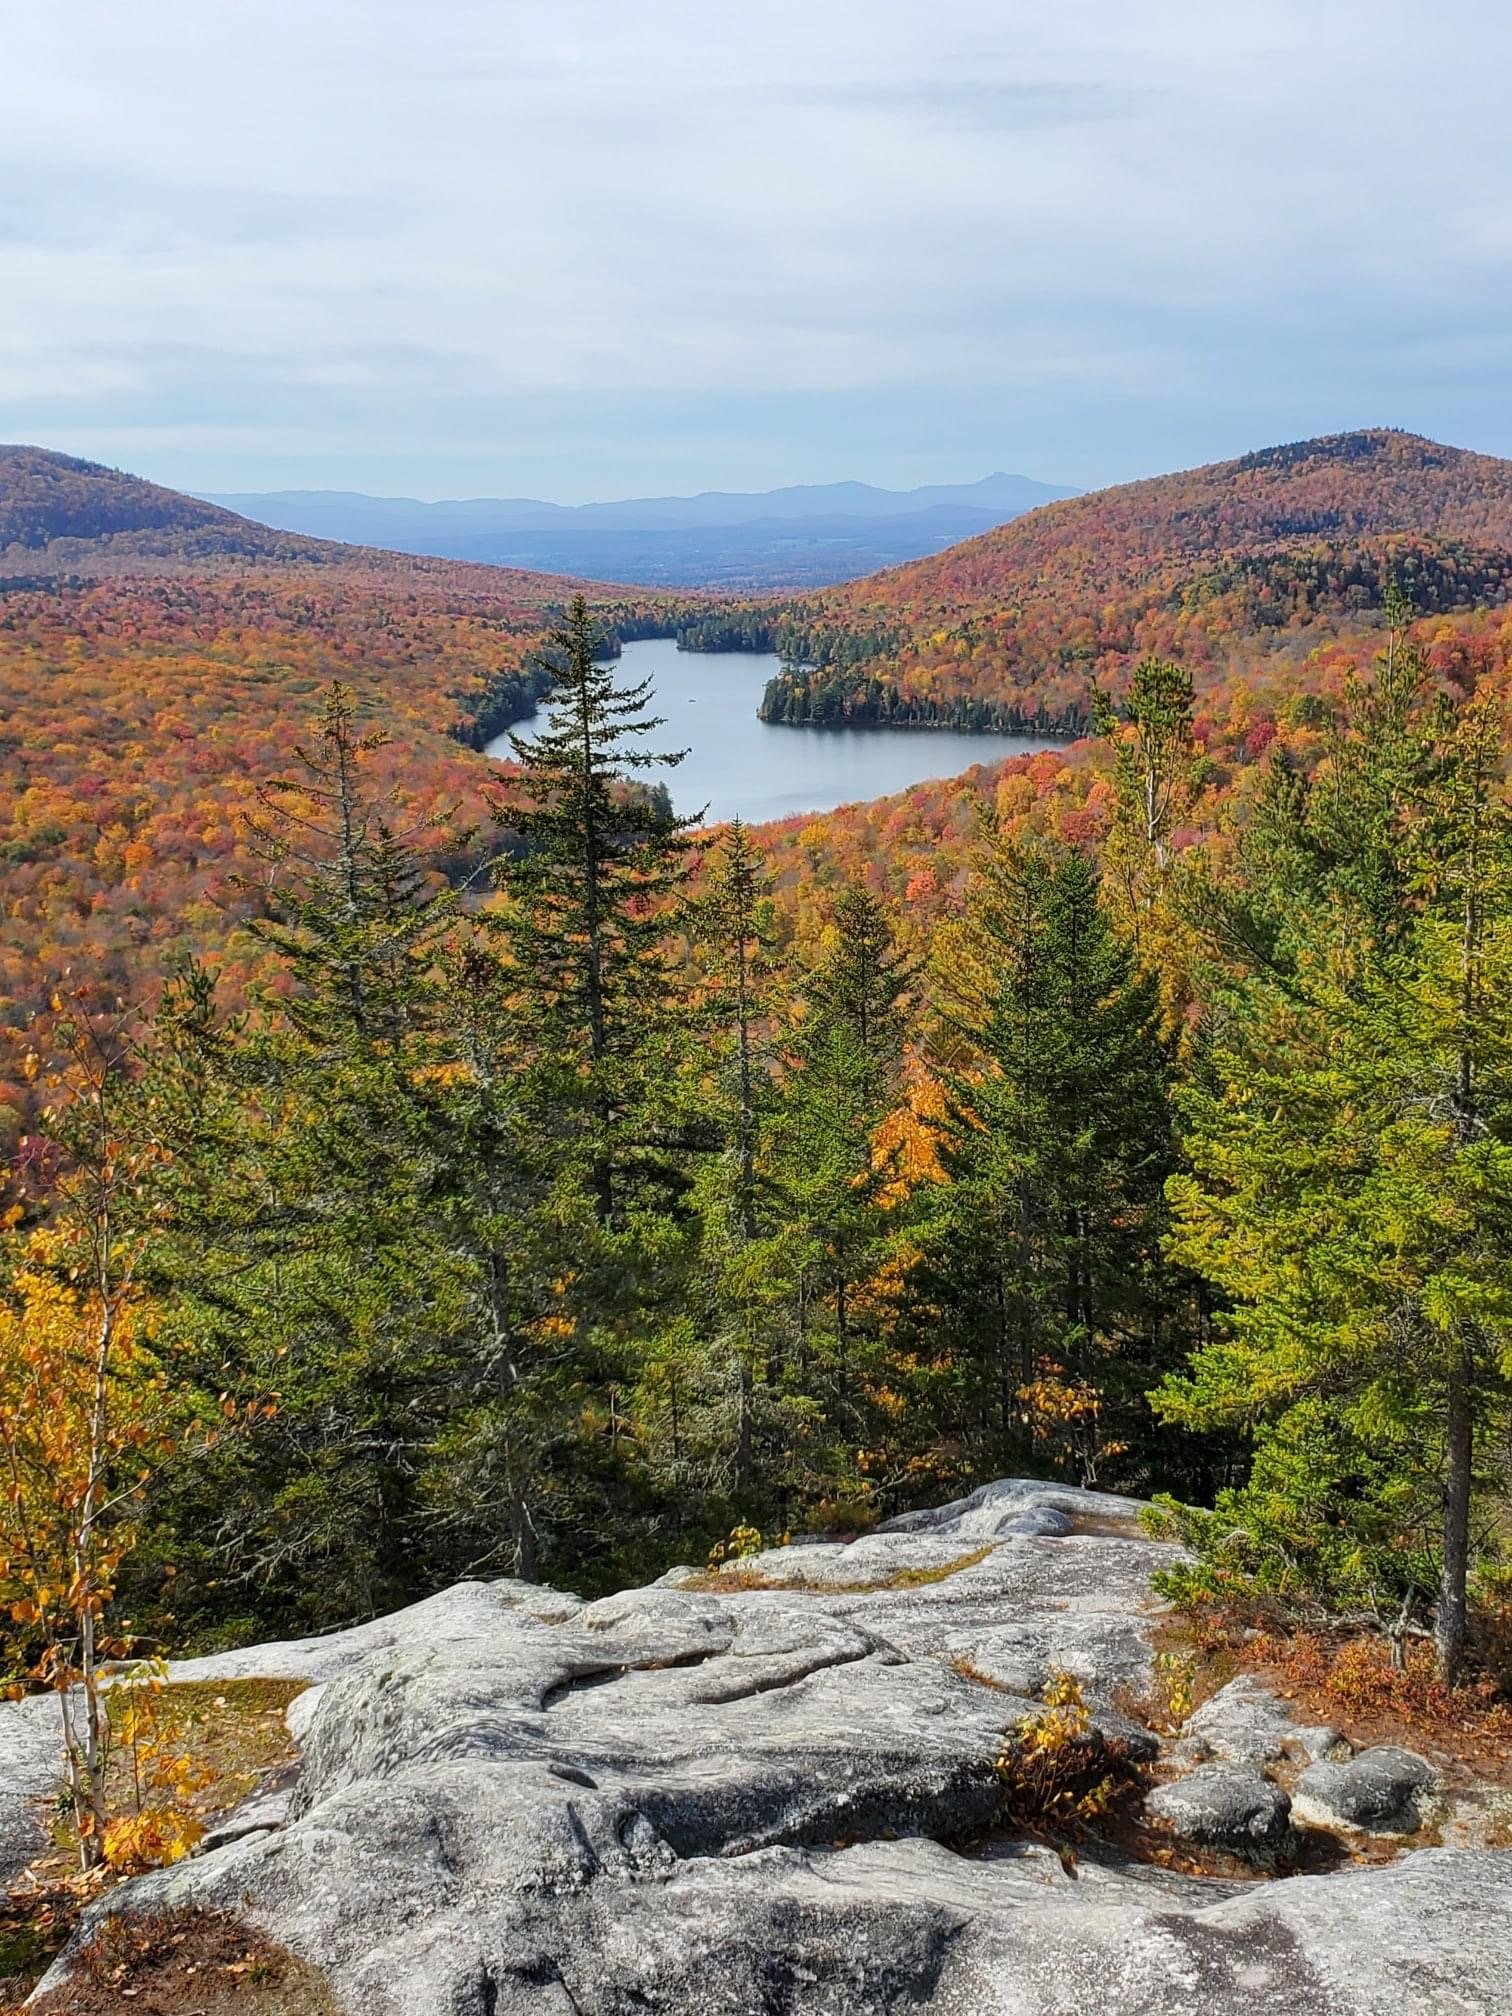   Exploring in Groton State Forest, Steve Lotspeich checked out this view of Kettle Pond from Owl's Head Mountain. Camel's Hump is on the far horizon. 